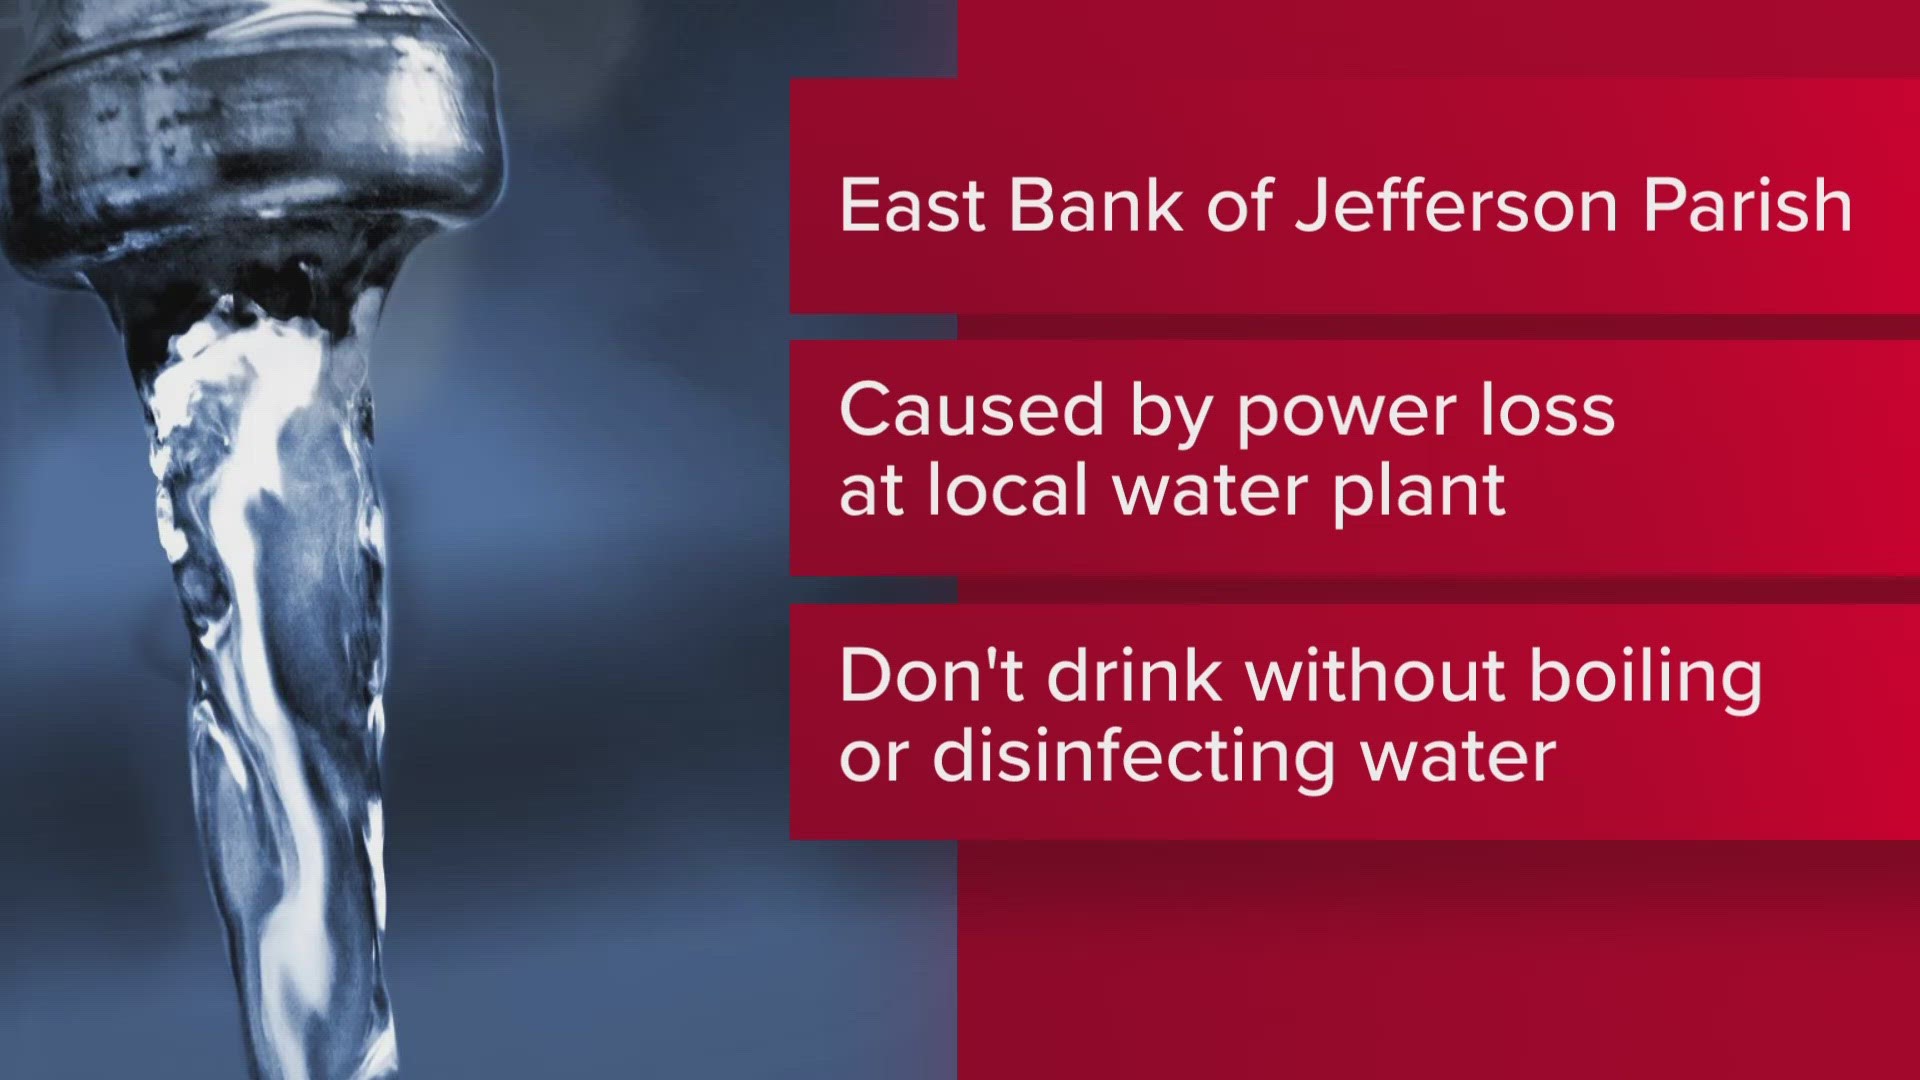 Residents on the east bank of Jefferson Parish are being advised to boil their water due to a loss of pressure at the water plant.